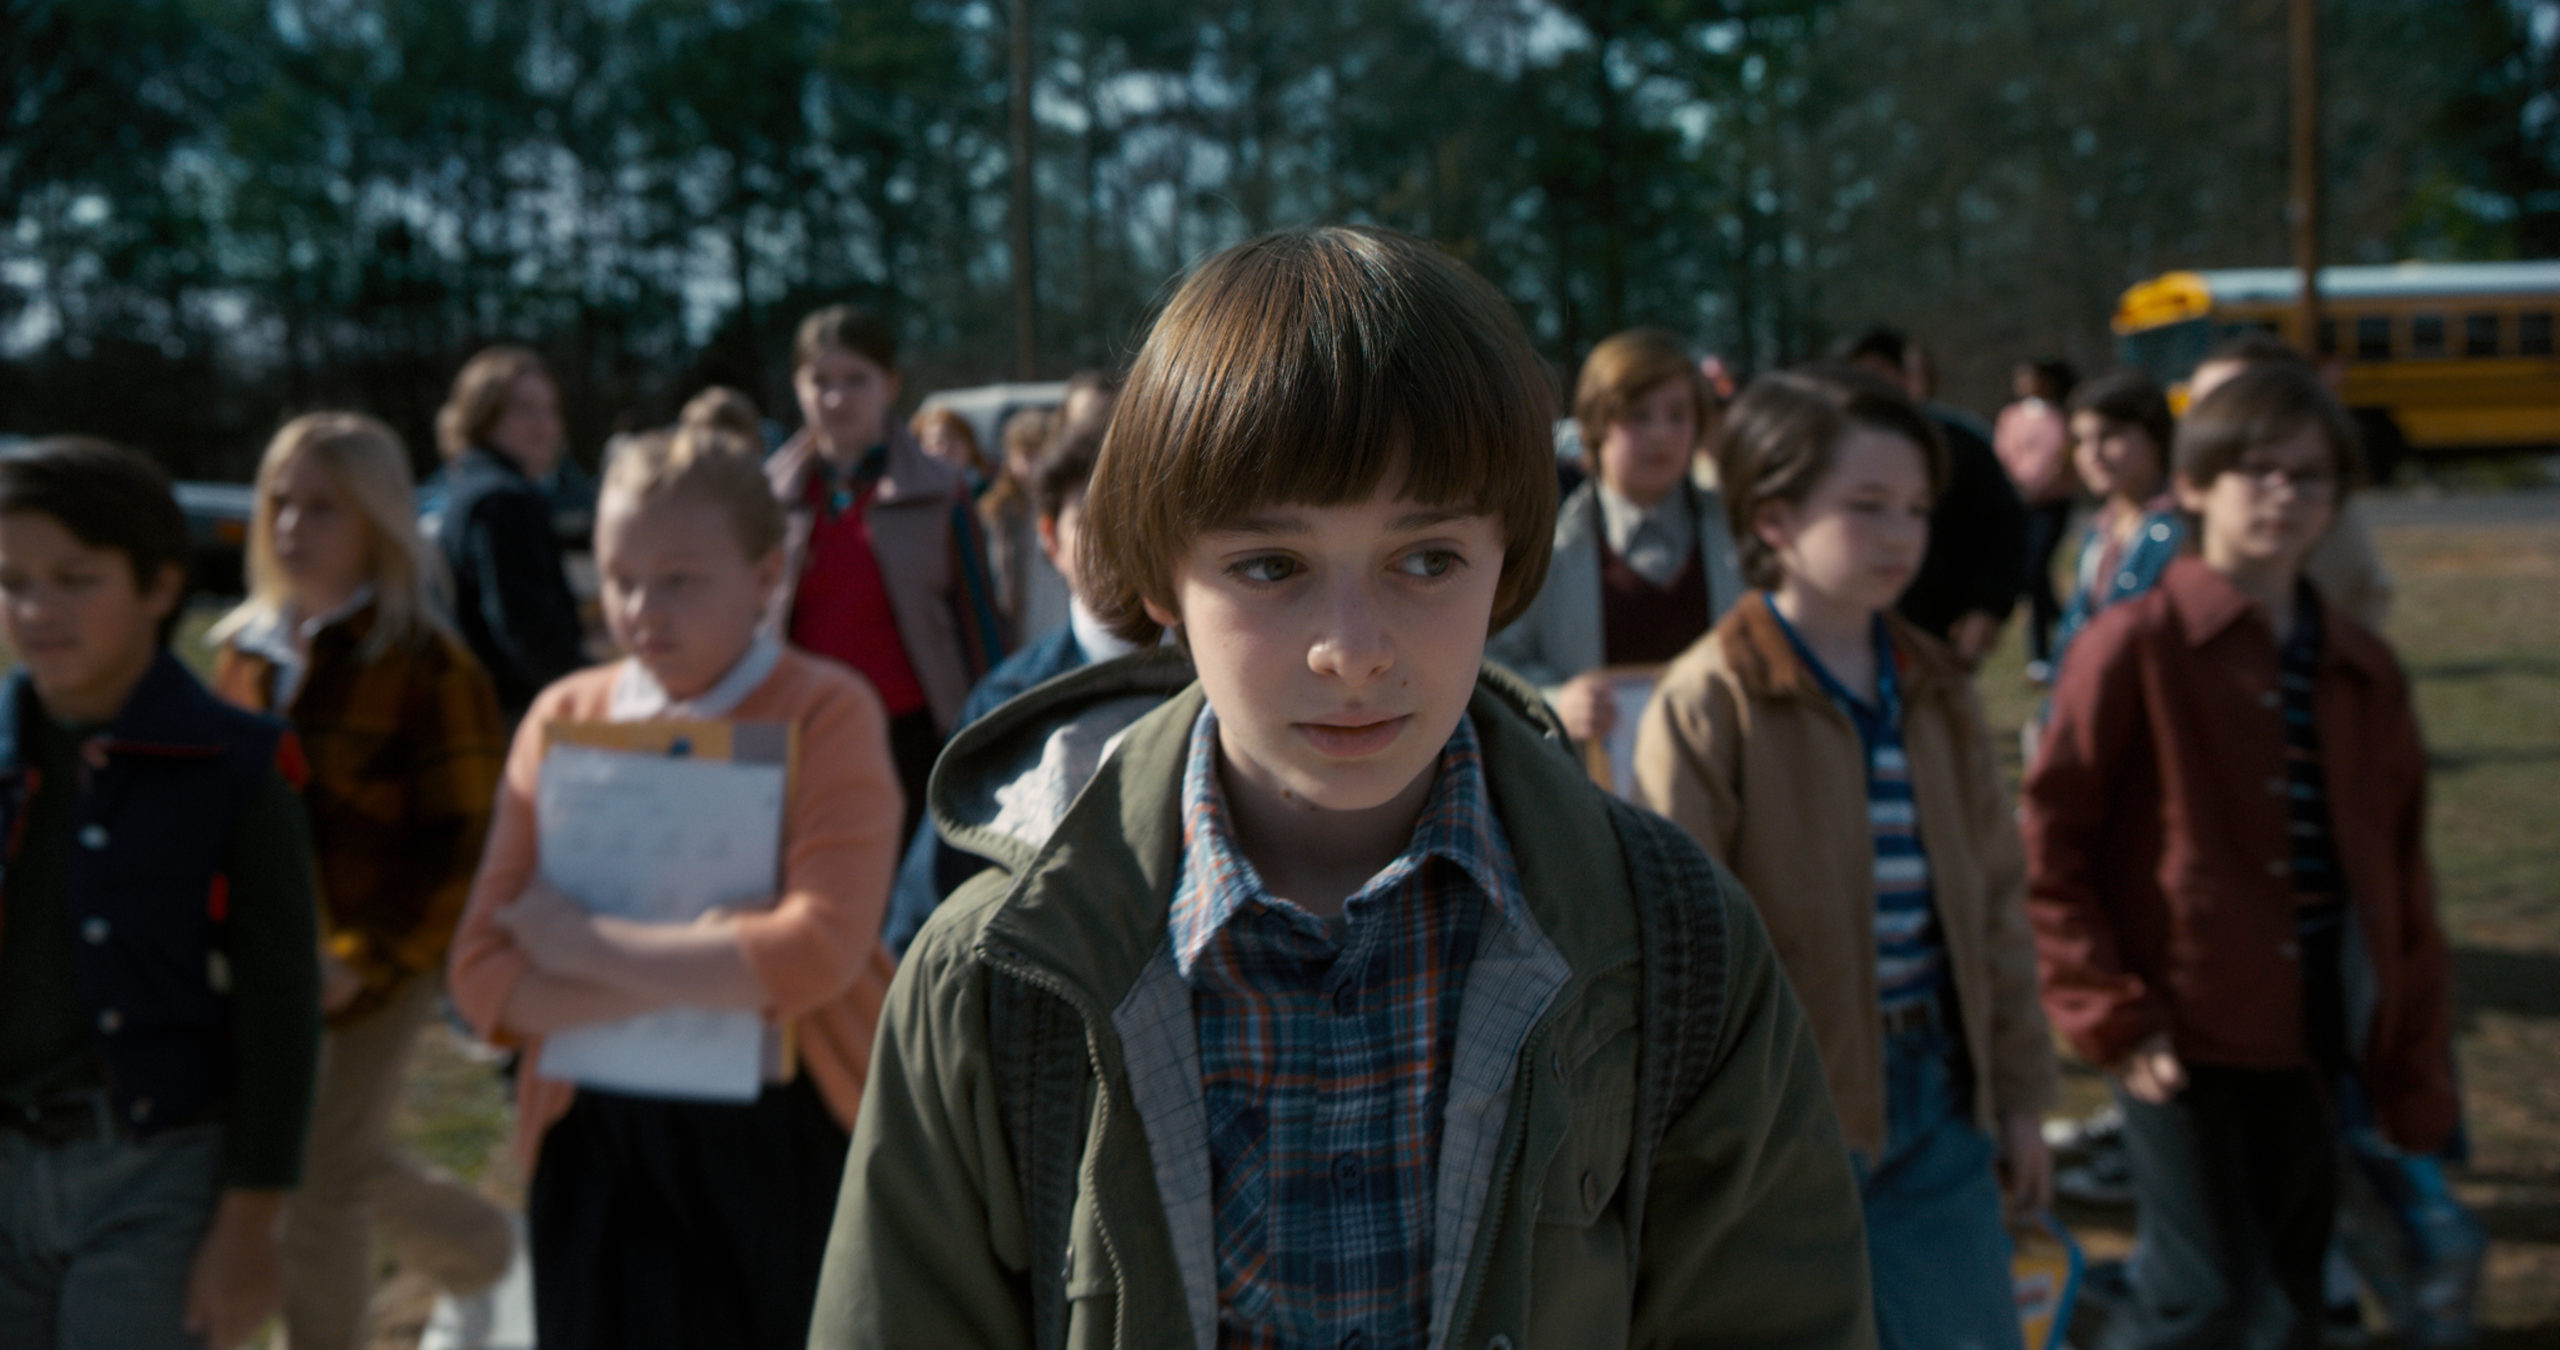 The Original Pitch For Stranger Things May Hold Clues About The Show’s Future